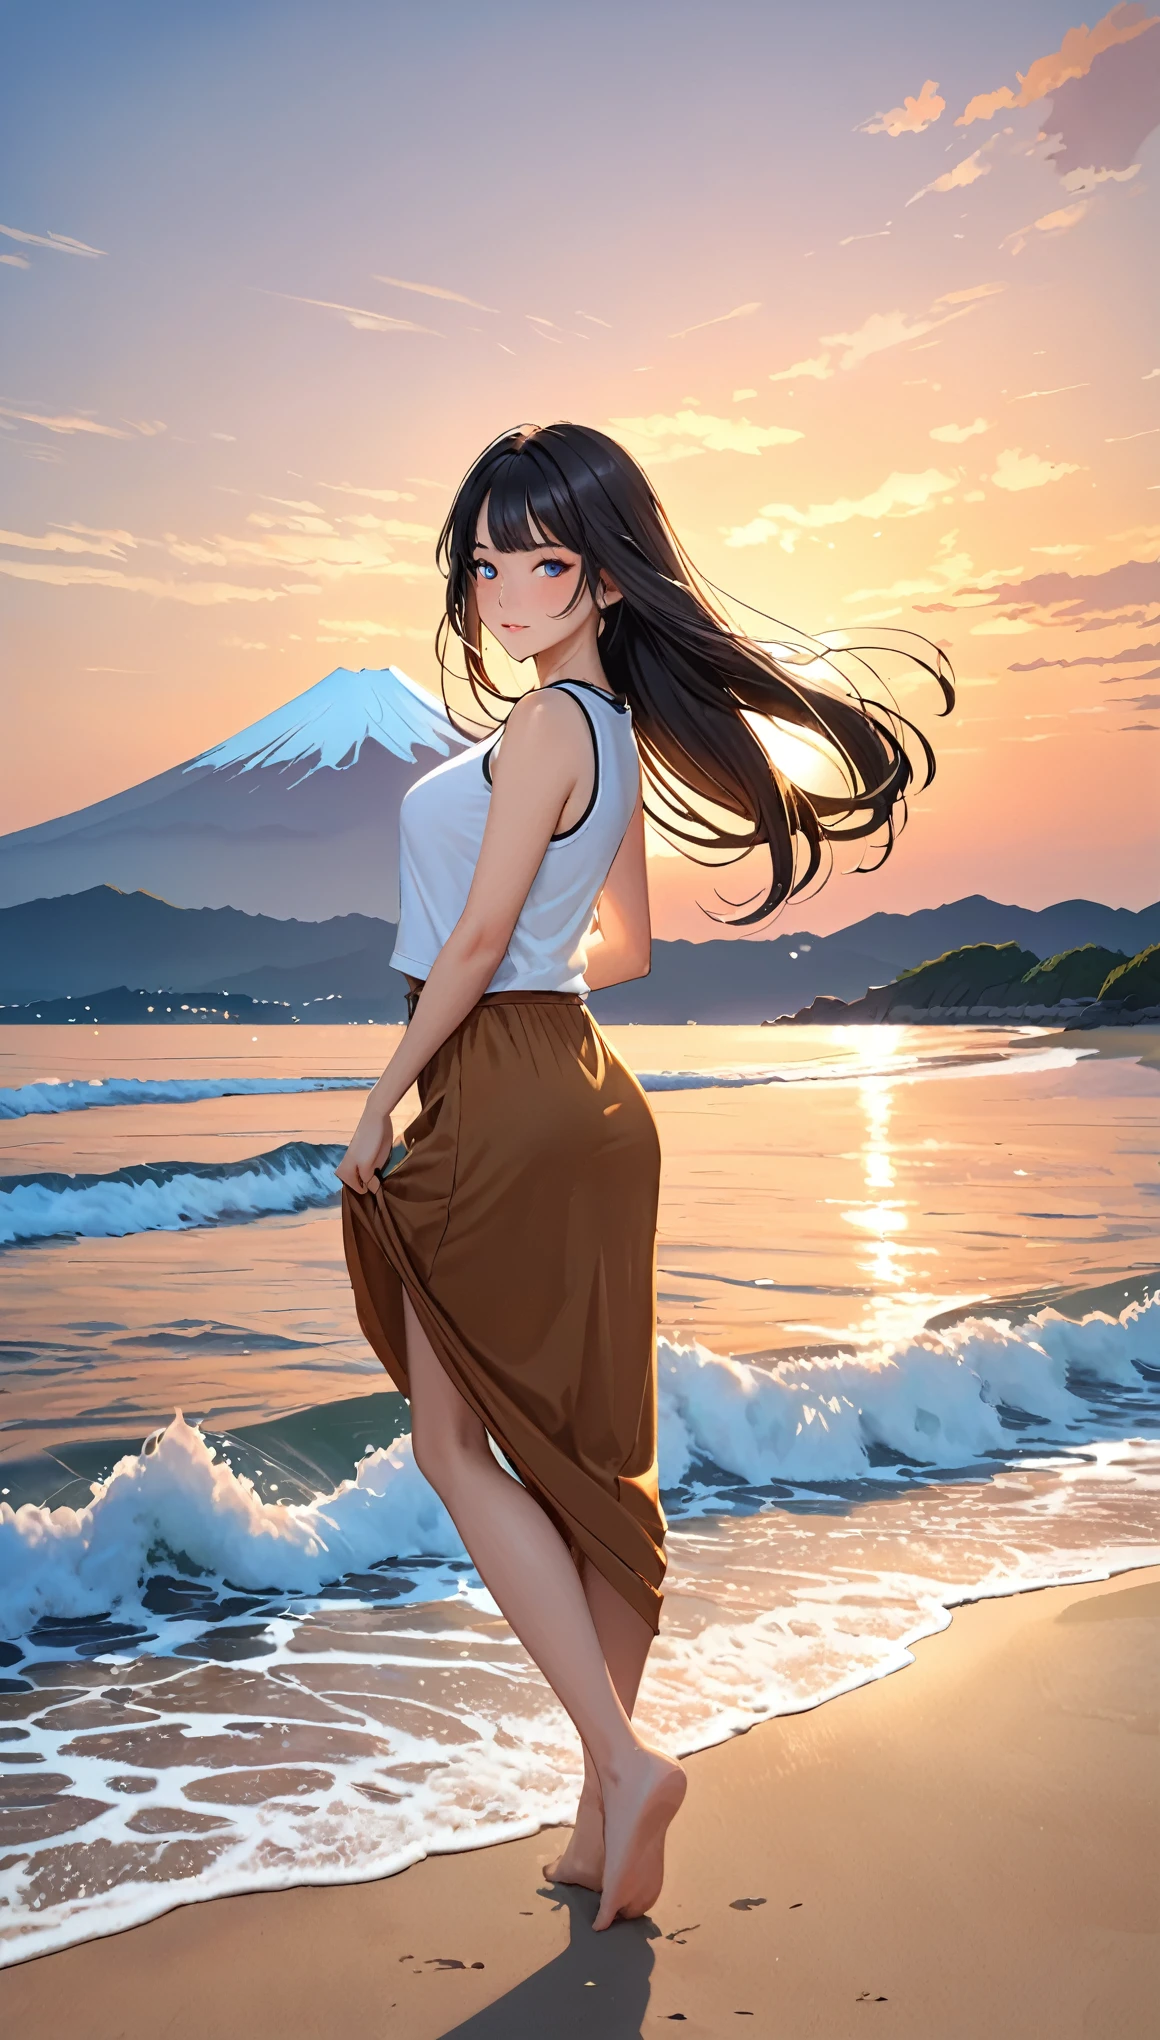 Highest quality, Super quality, 16K, Incredibly absurd, Very detailed, 2.5D, delicate and dynamic, blue sky, Calm sea, Sandy Beach, Sunset, sunset, Enoshima, Fuji Mountain, Small face, Extremely delicate facial expression, Delicate eye depiction, Extremely detailed hair, Upper body close-up, erotic, sole sexy Japanese lady, healthy shaped body, 22 years old lady, student,  huge firm bouncing busts, white silver long hair, sexy long legs, Glowing Skin, Soft Skin, Sleeveless T-shirt, brown long skirt, barefoot, Standing backwards, Turn to the camera